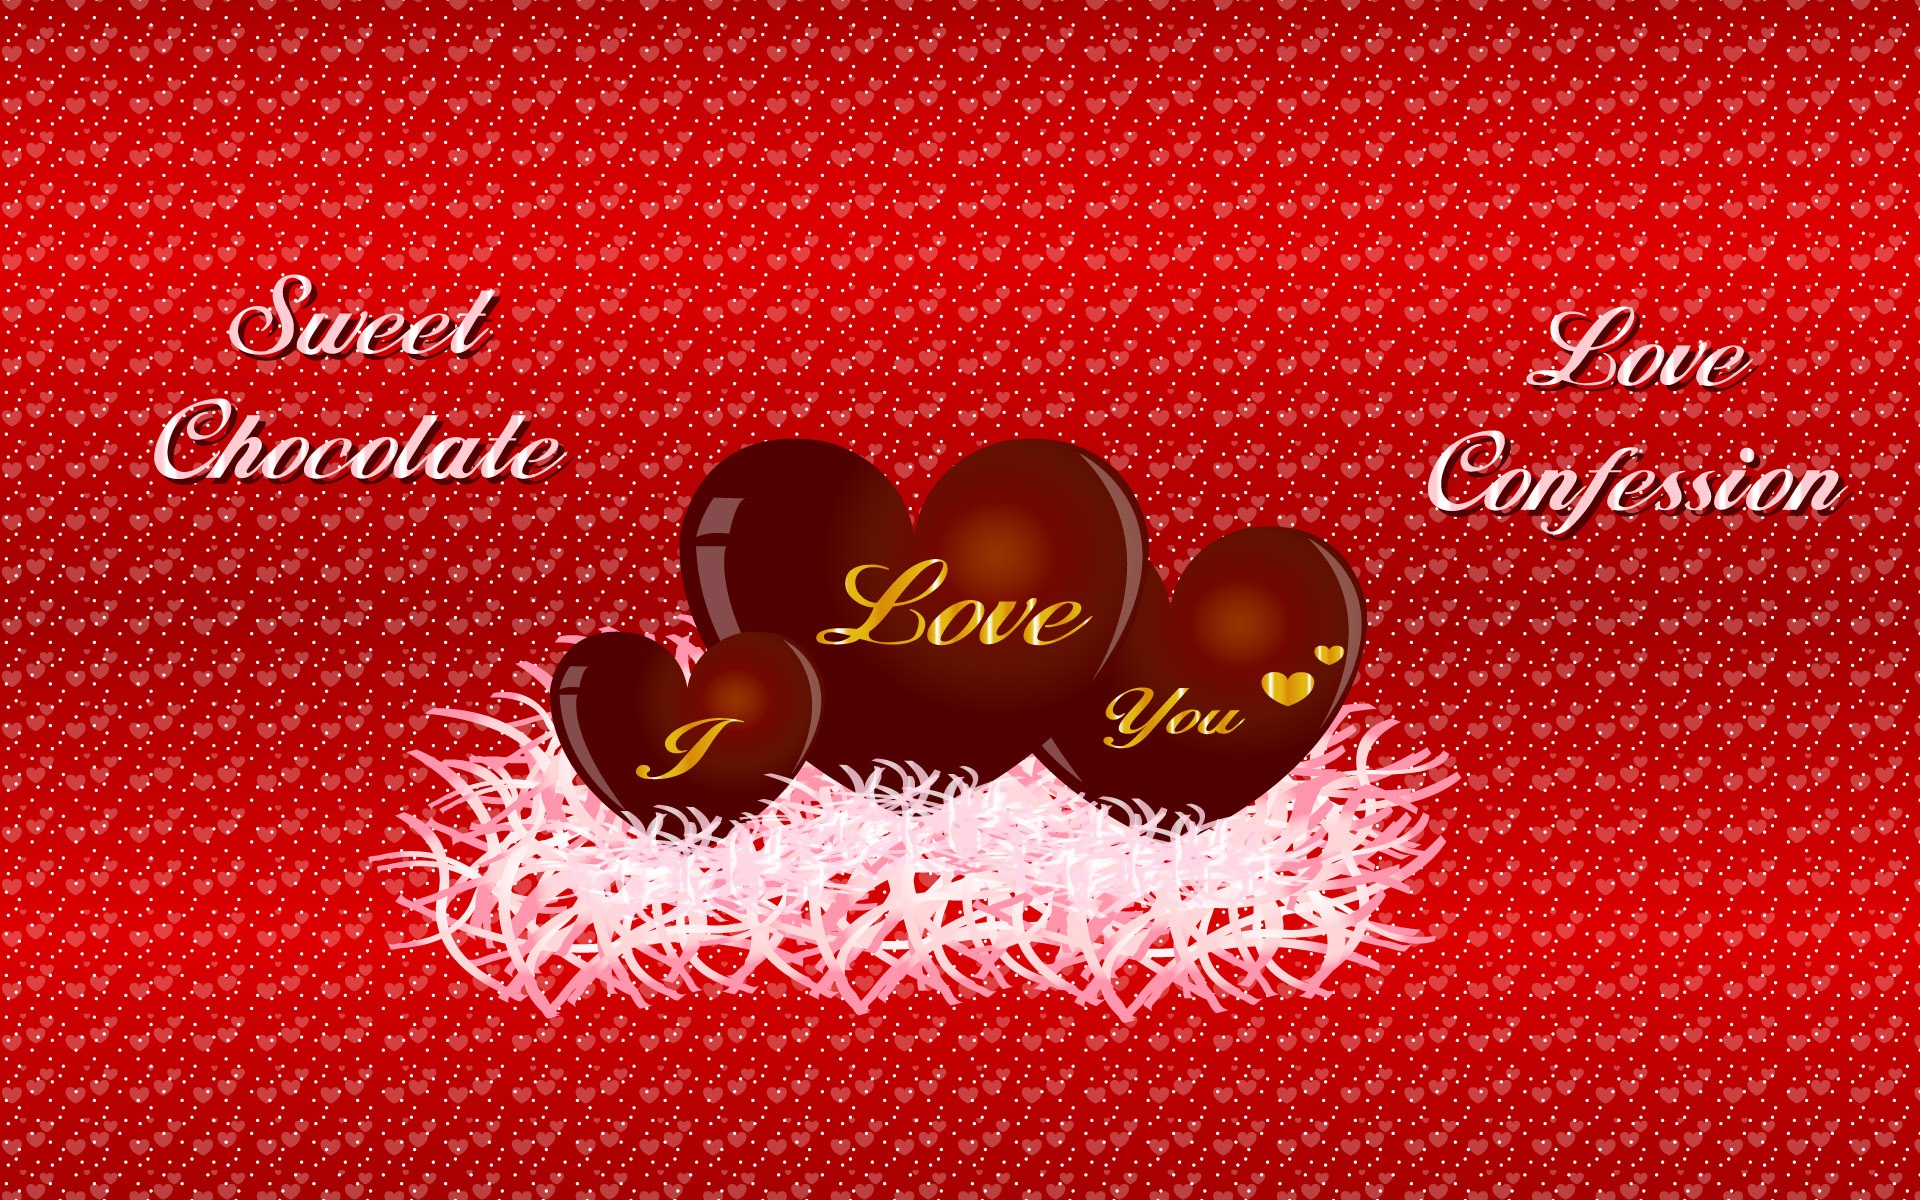 Valentine's Day Theme Wallpapers (1) #15 - 1920x1200